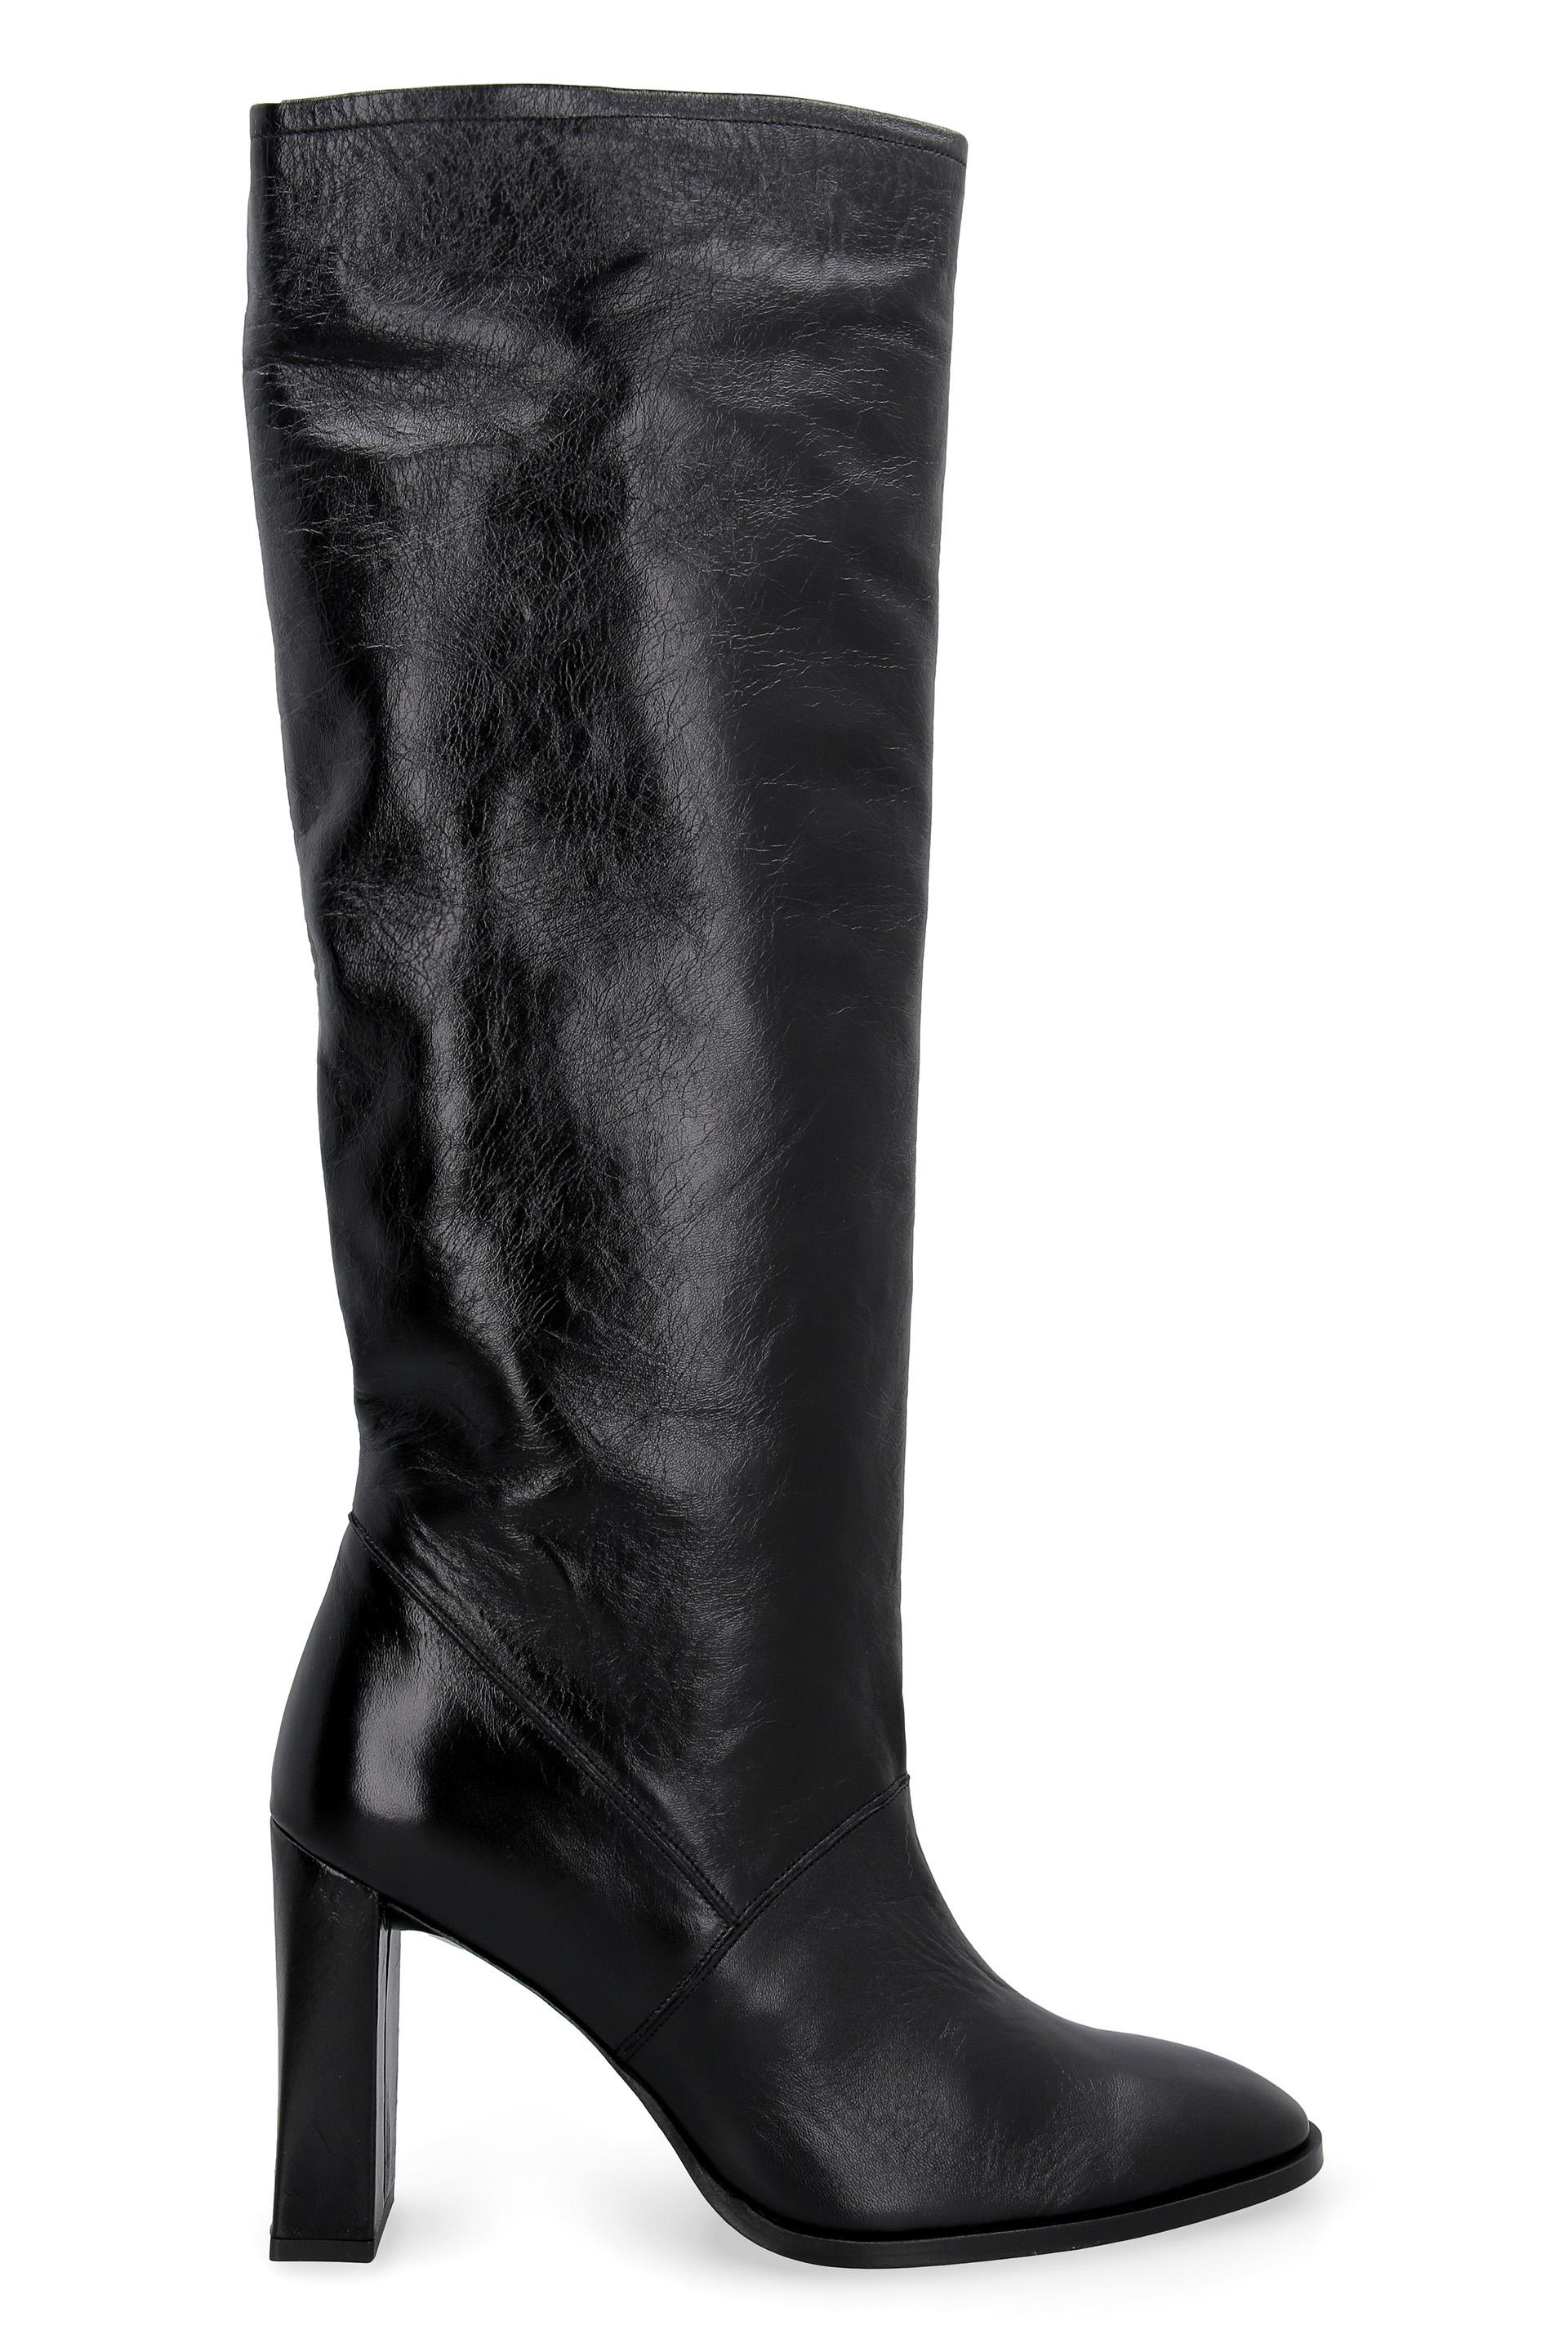 BY FAR Camilla Leather Boots in Black - Lyst